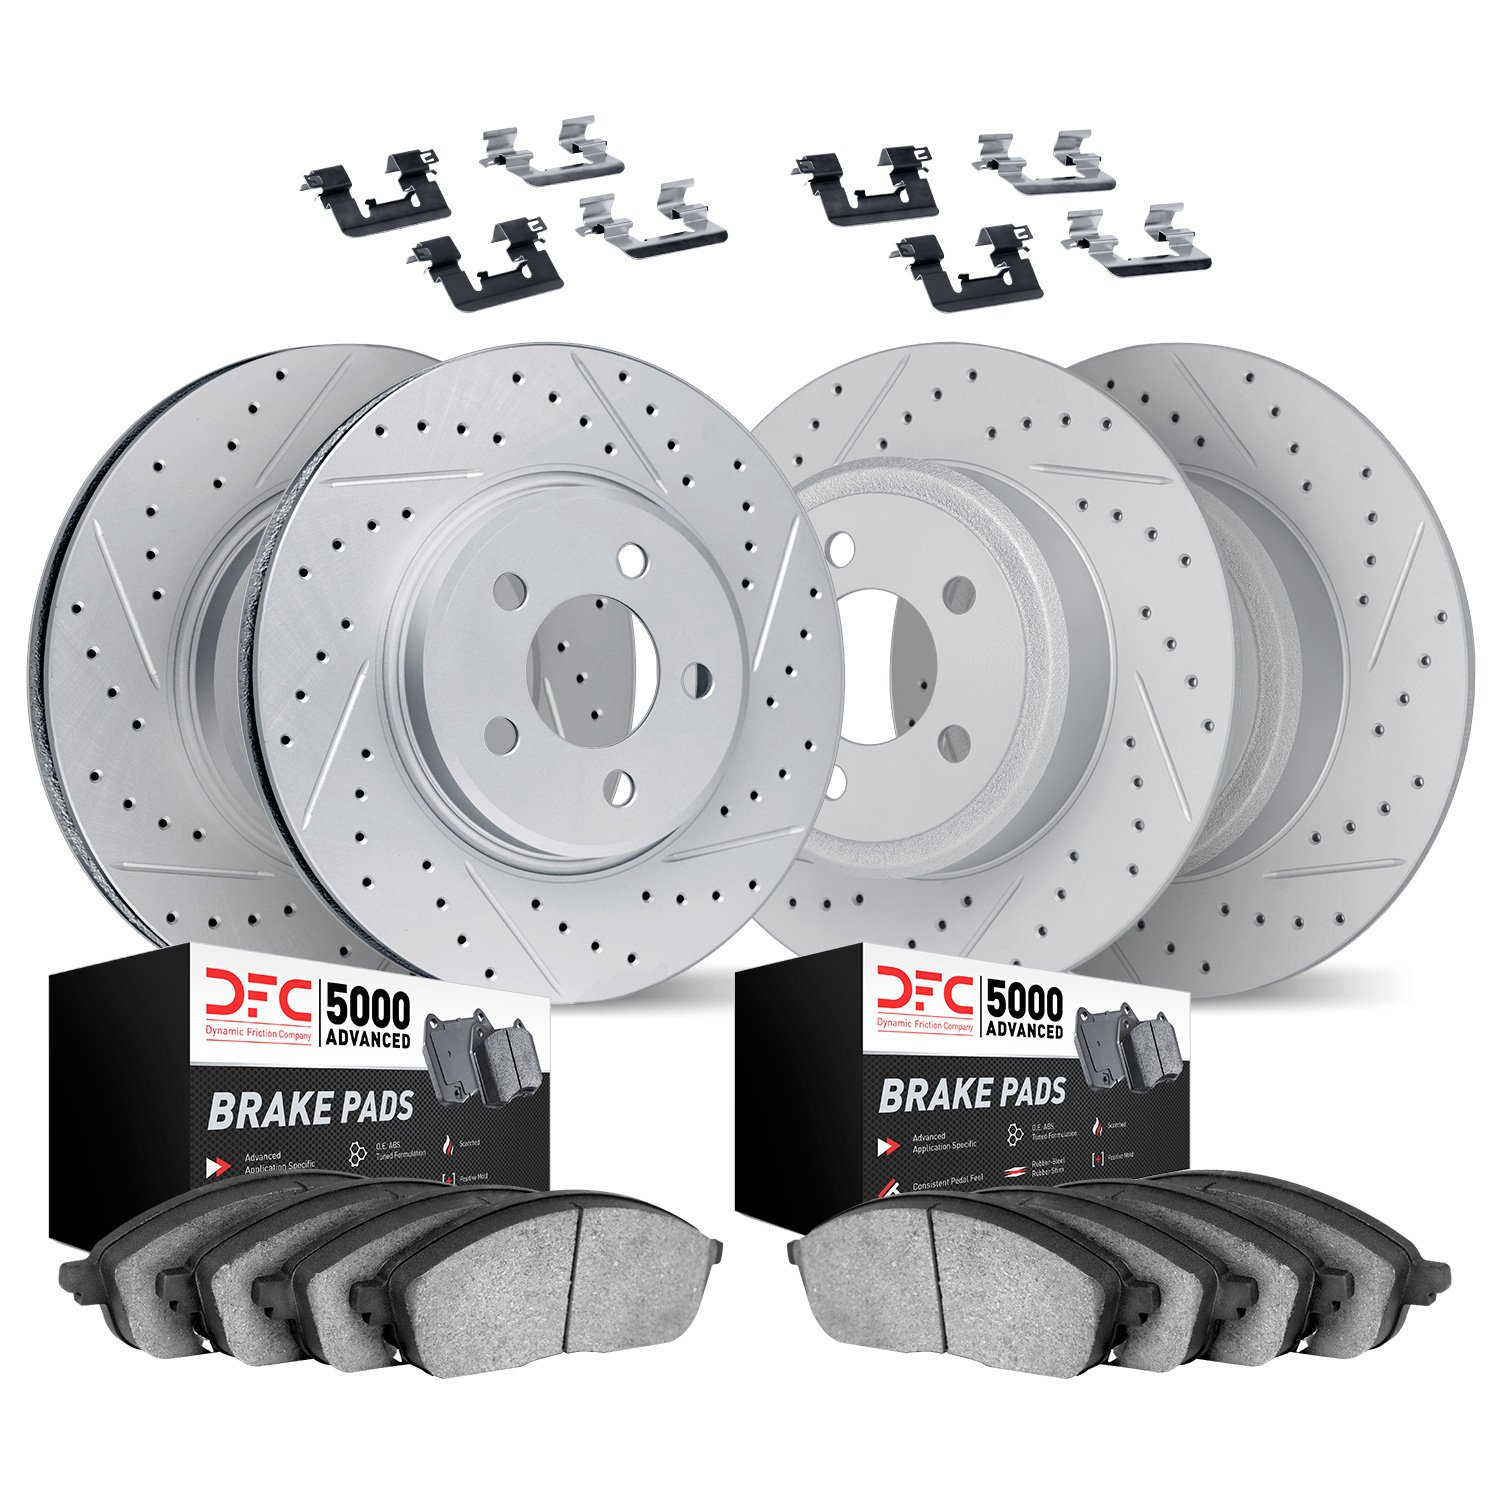 2514-42069 Geoperformance Drilled/Slotted Rotors w/5000 Advanced Brake Pads Kit & Hardware, 2005-2010 Mopar, Position: Front and